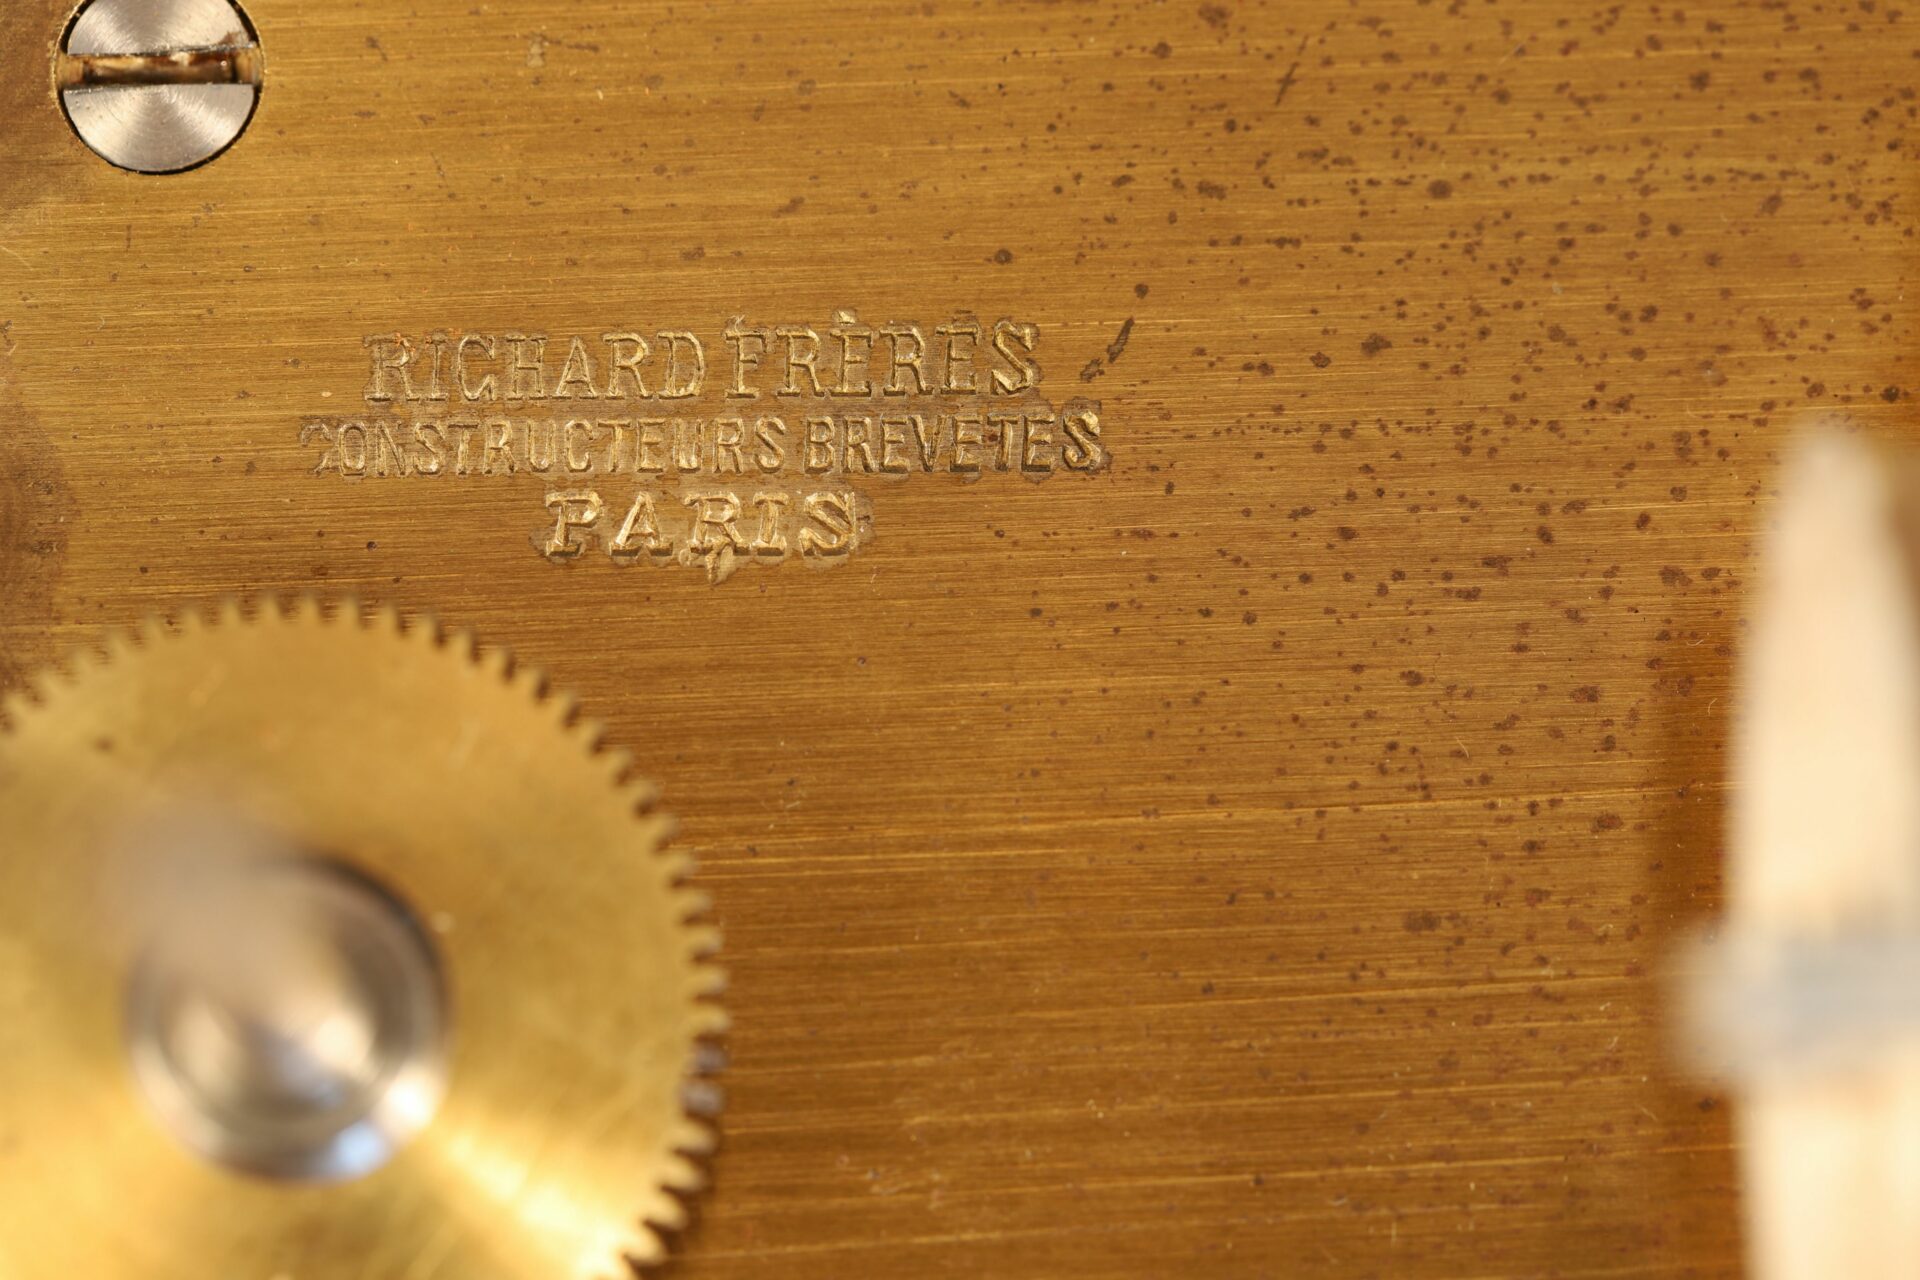 Image of Maker's Signature on Height Recorder